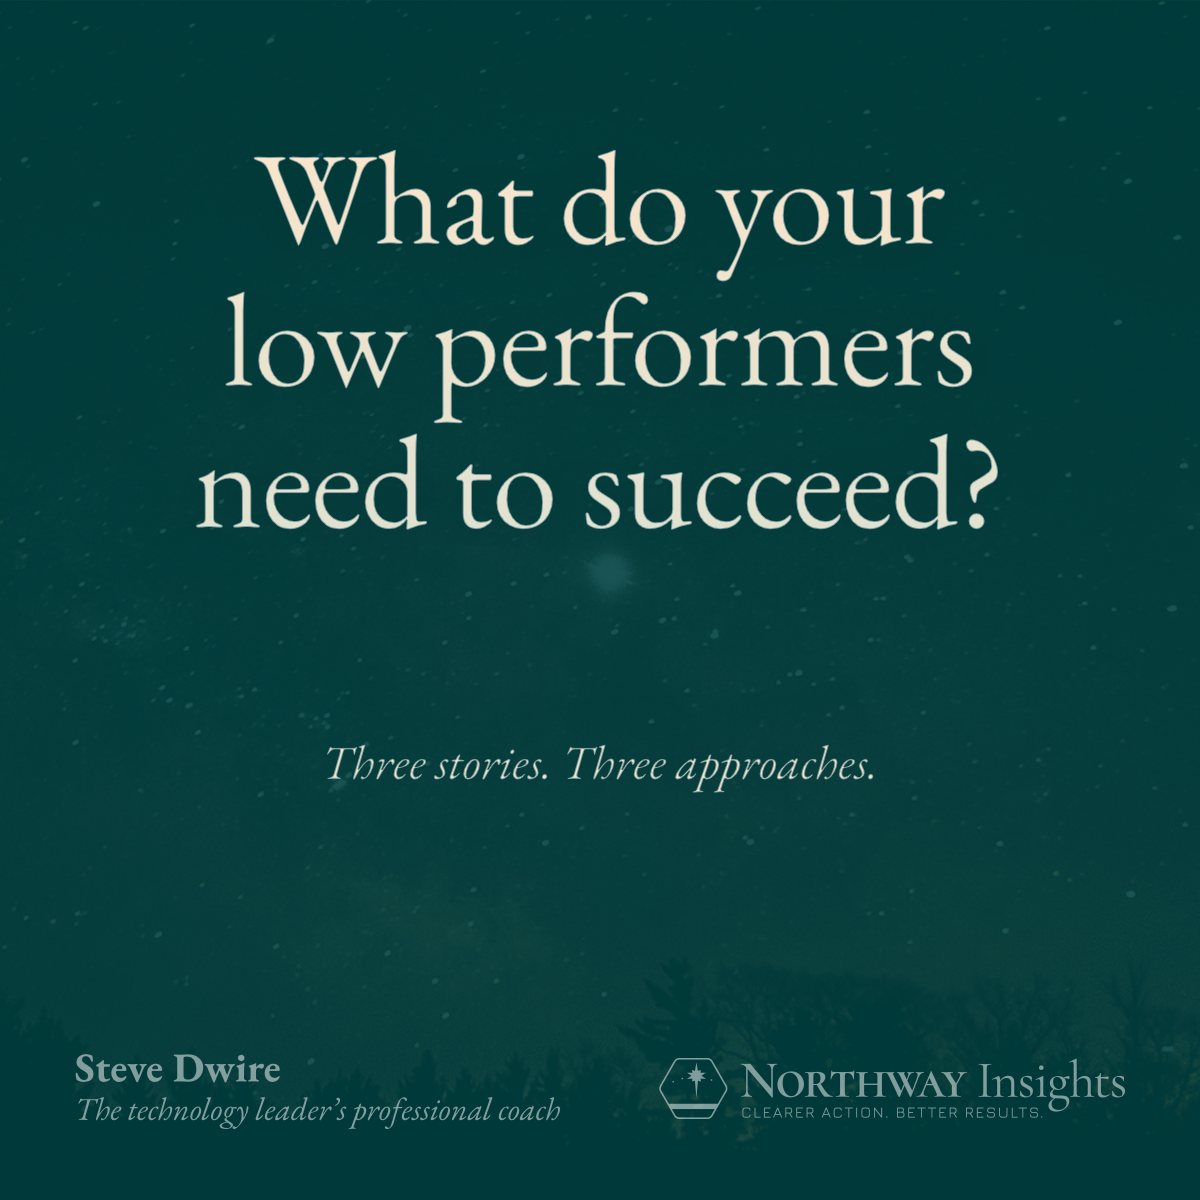 What do your low performers need to succeed? (Three stories. Three approaches.)